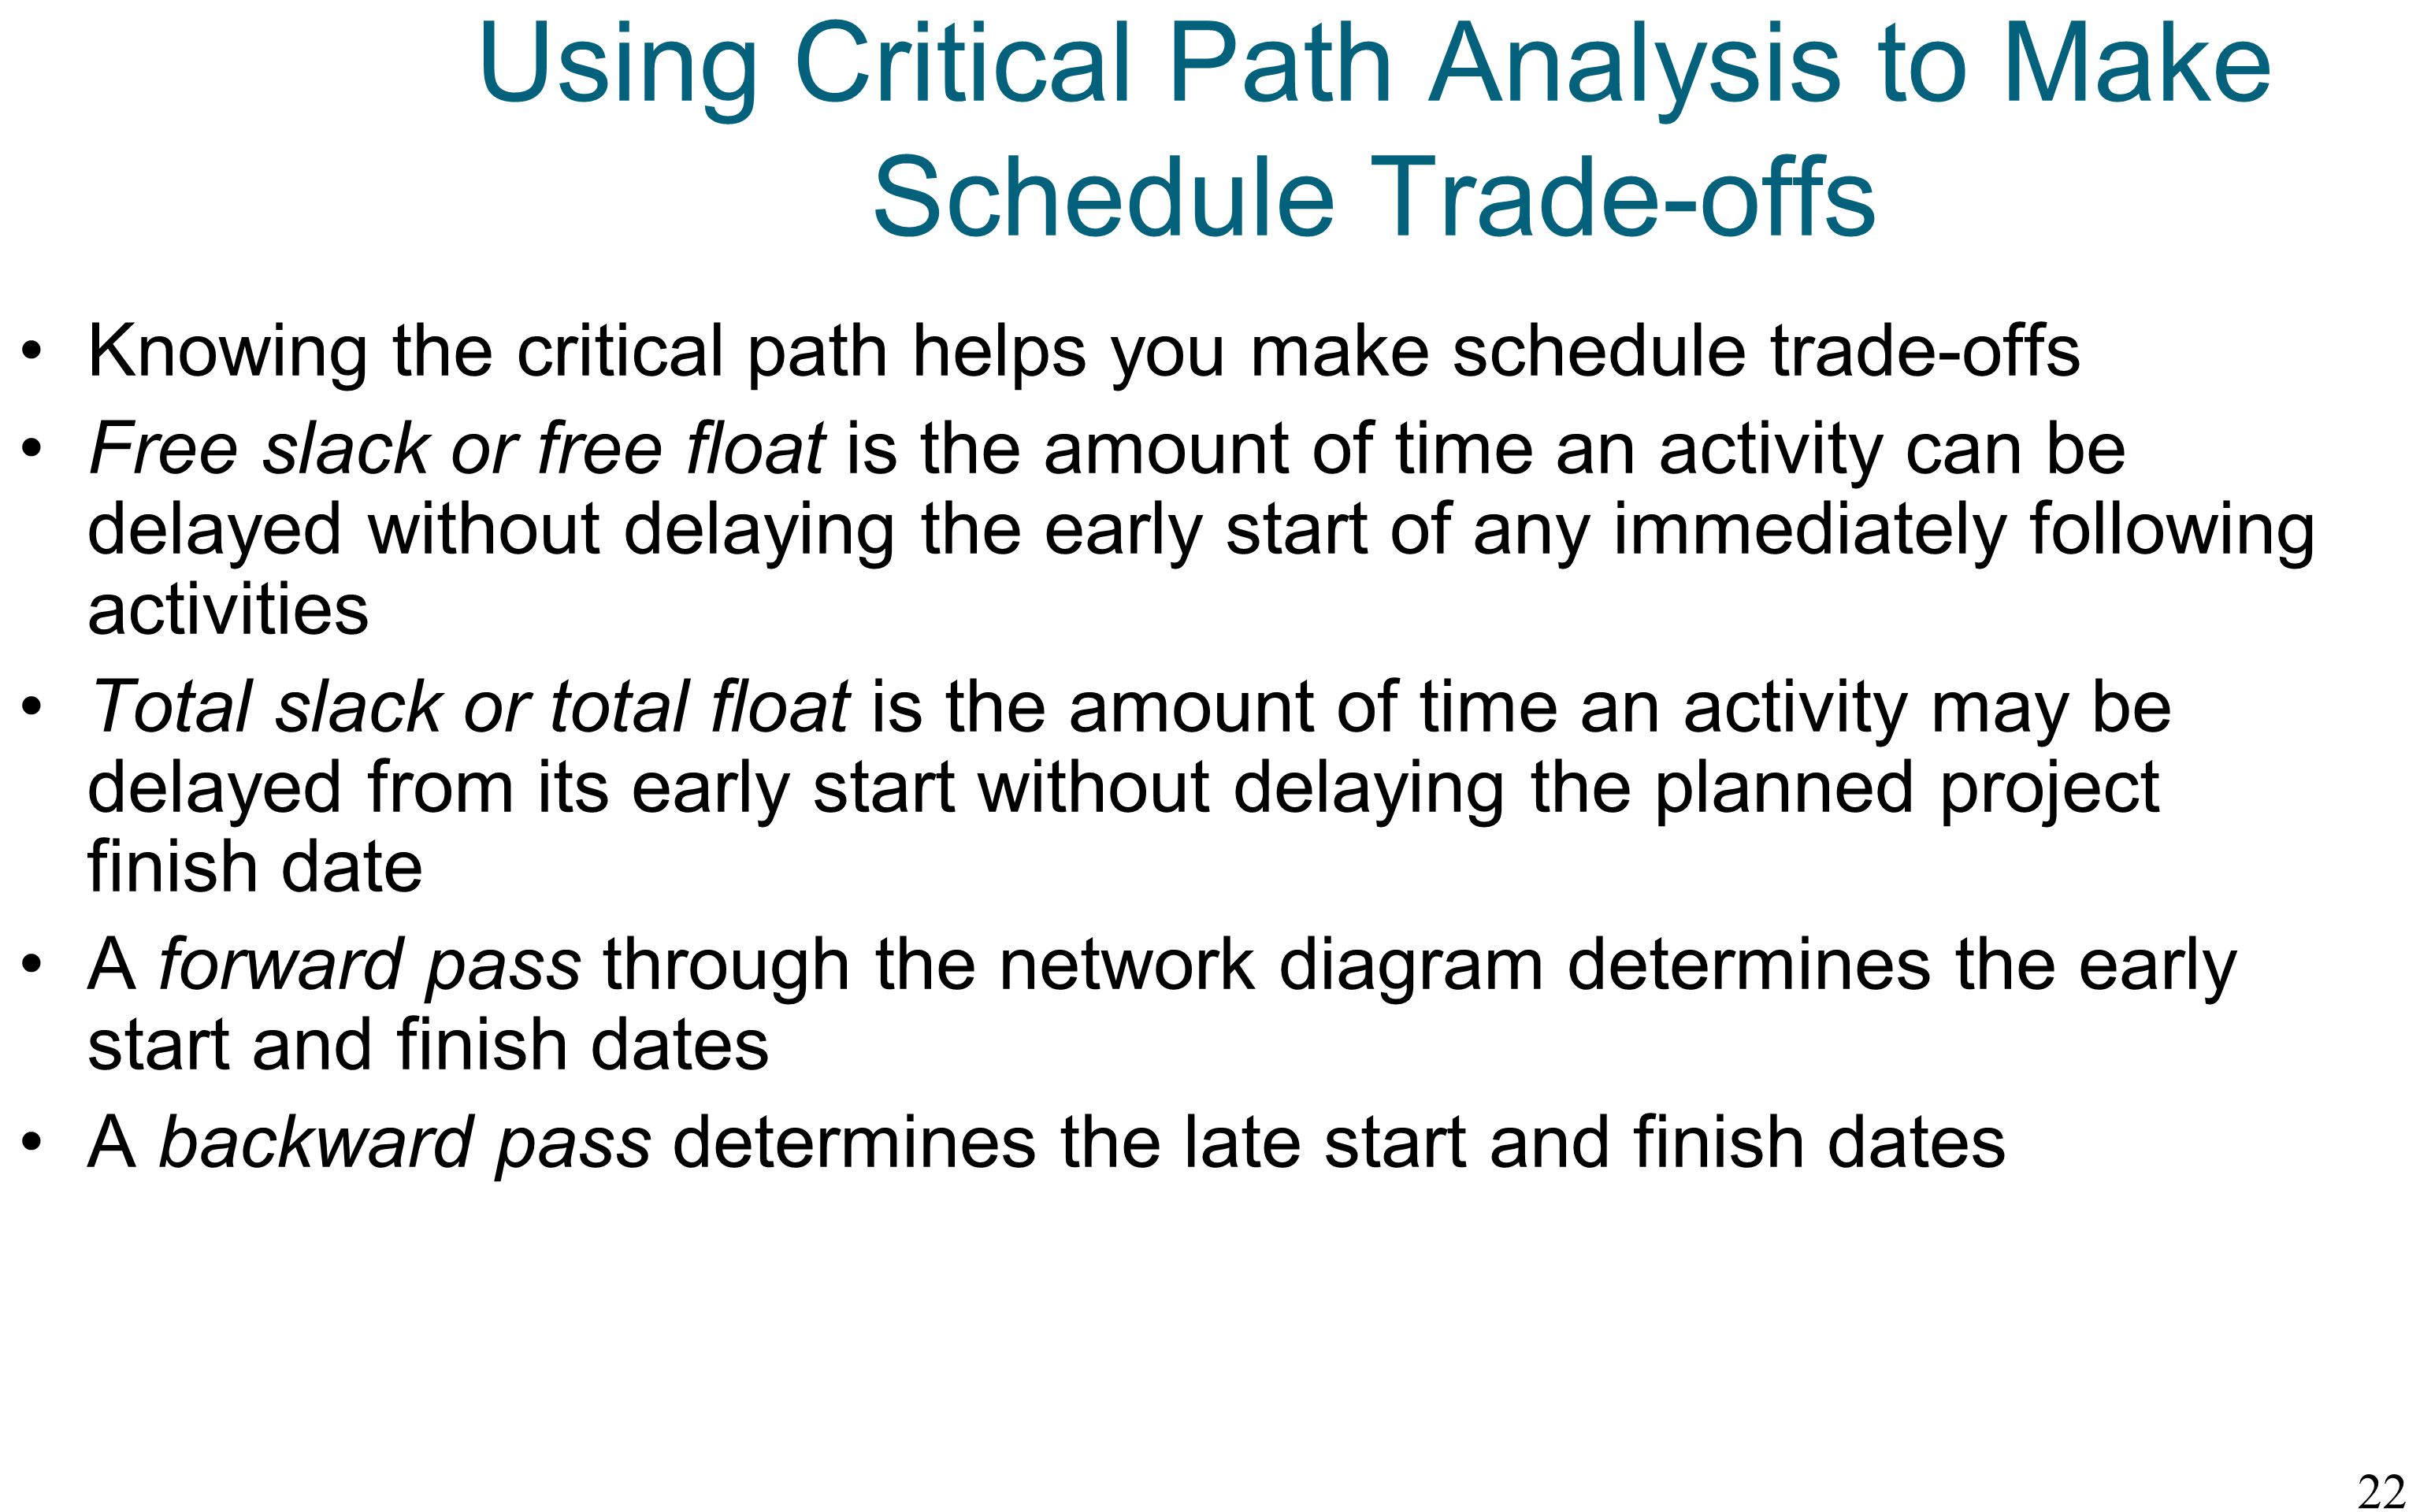 Using Critical Path Analysis to Make Schedule Trade-offs